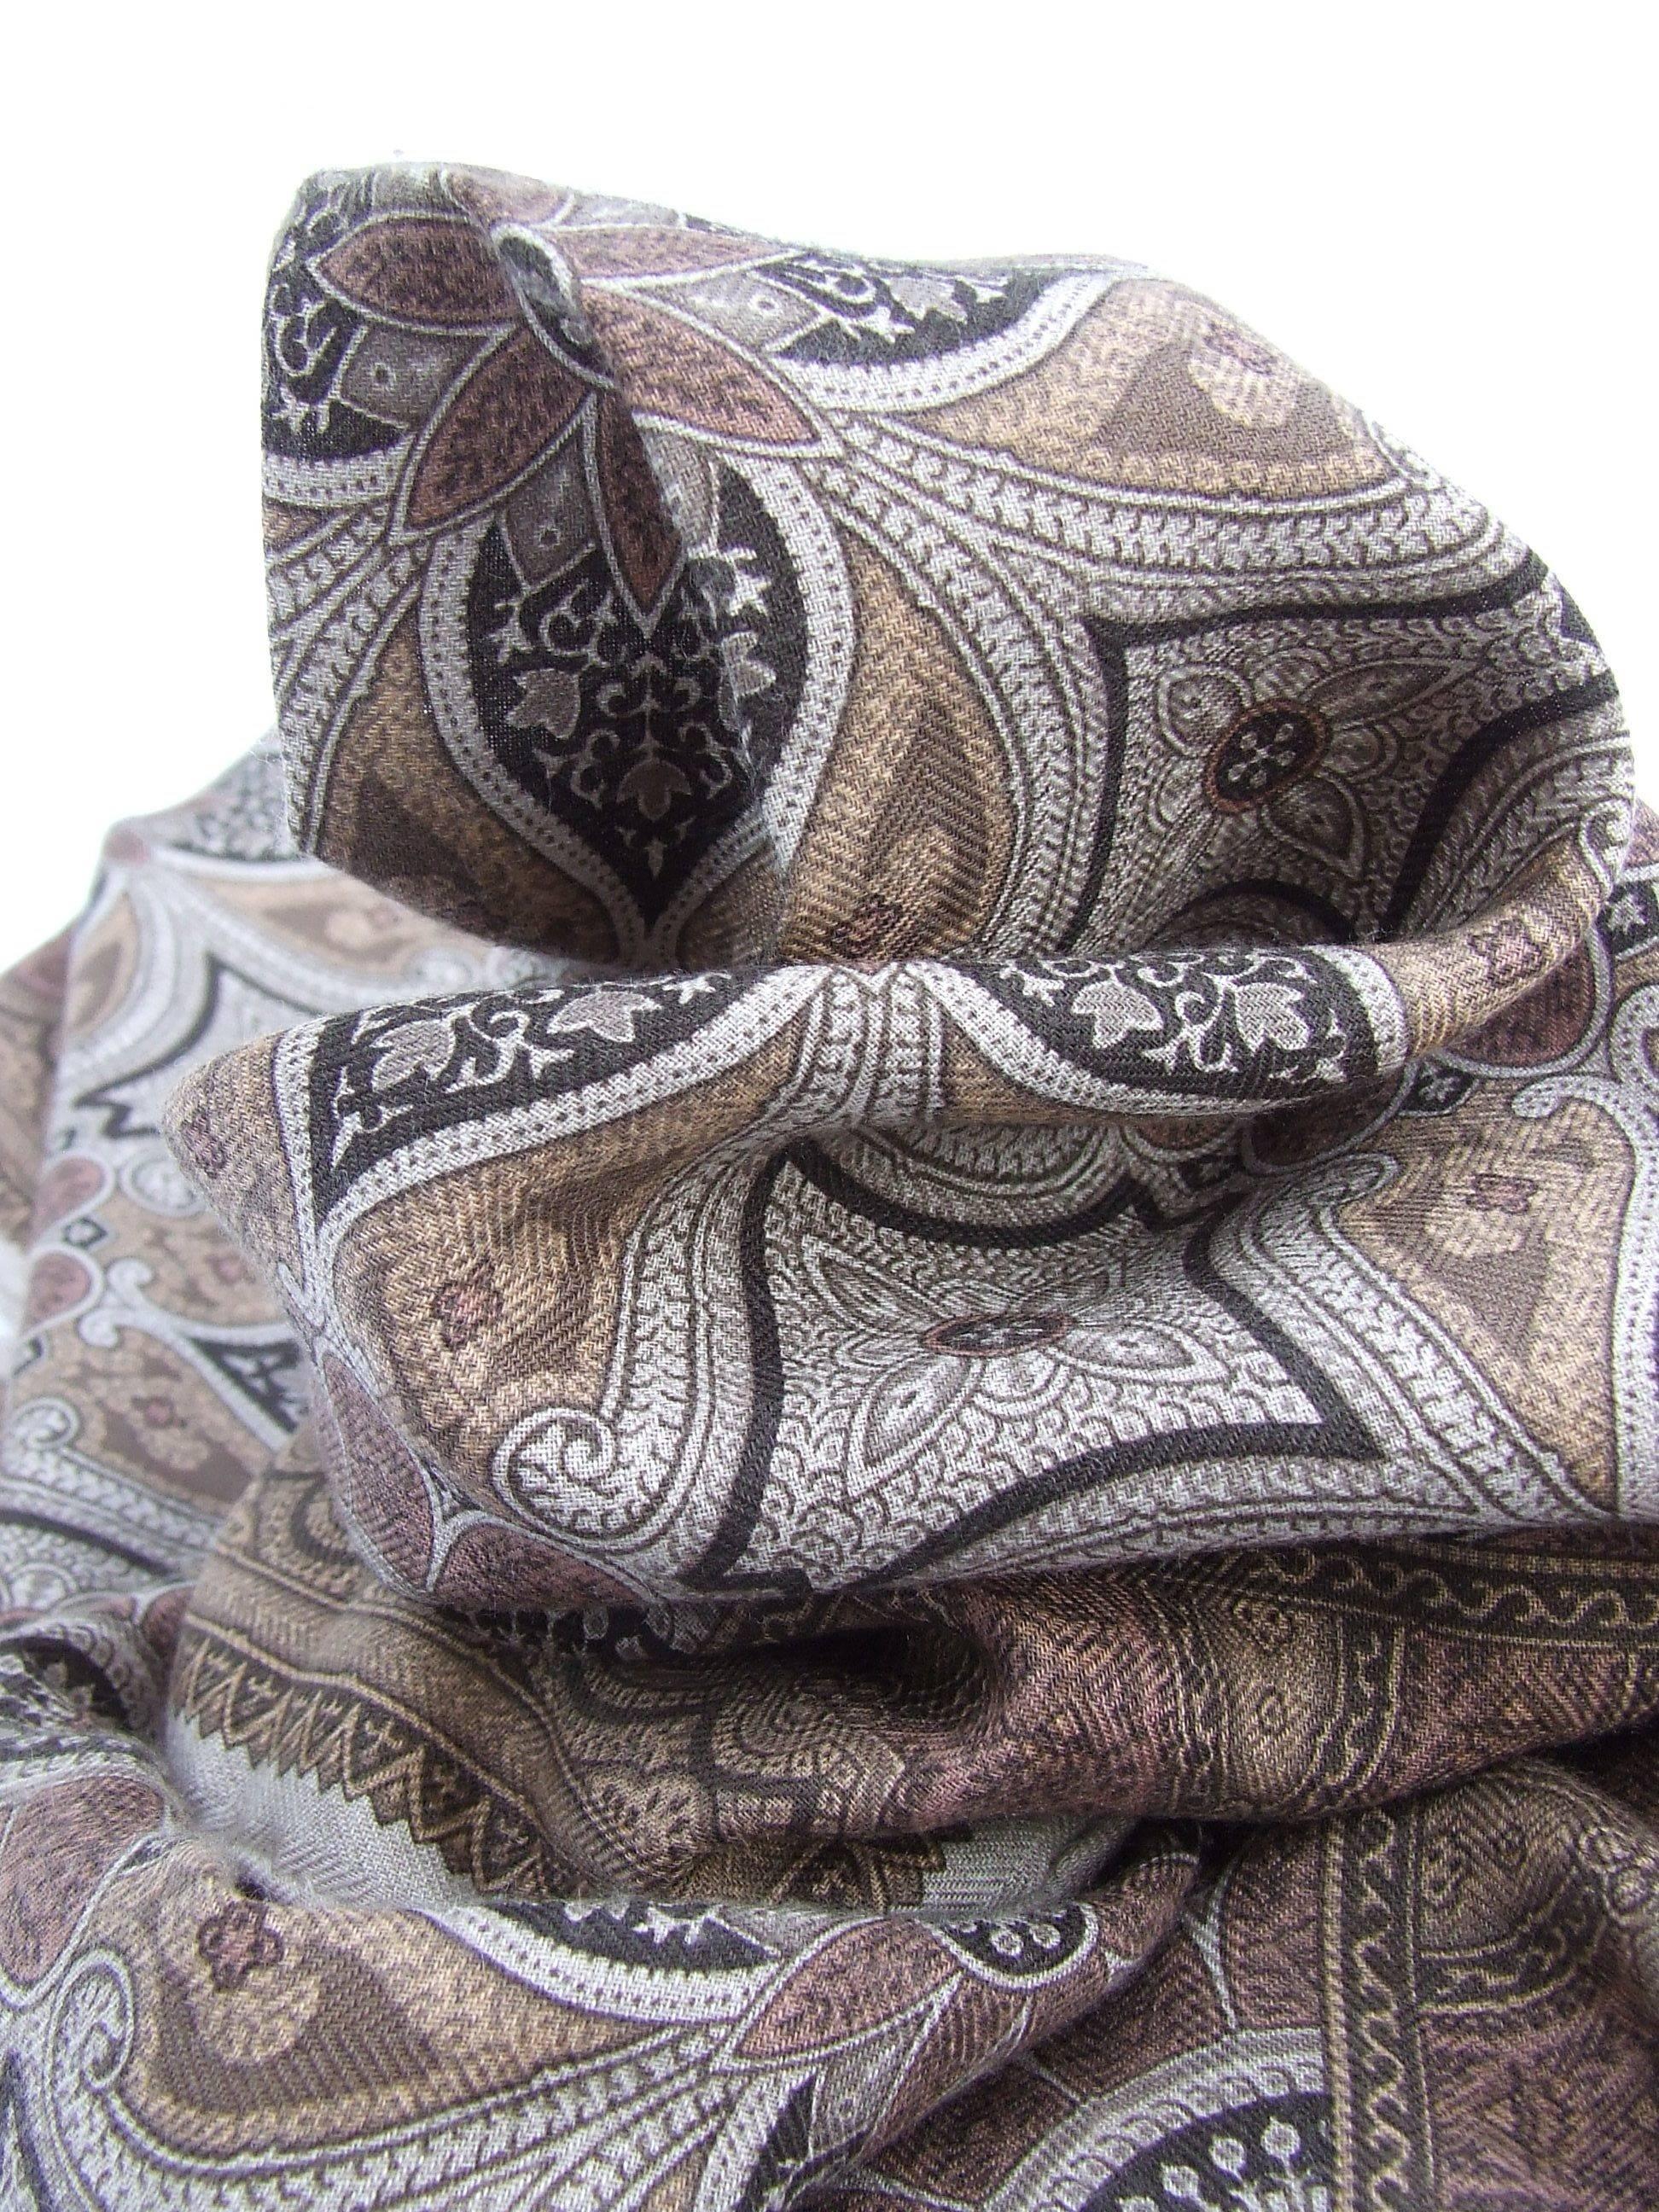 Hermès Long Scarf Stole Pashmina Cashmere and Silk Shades of Beige 181 cm 3